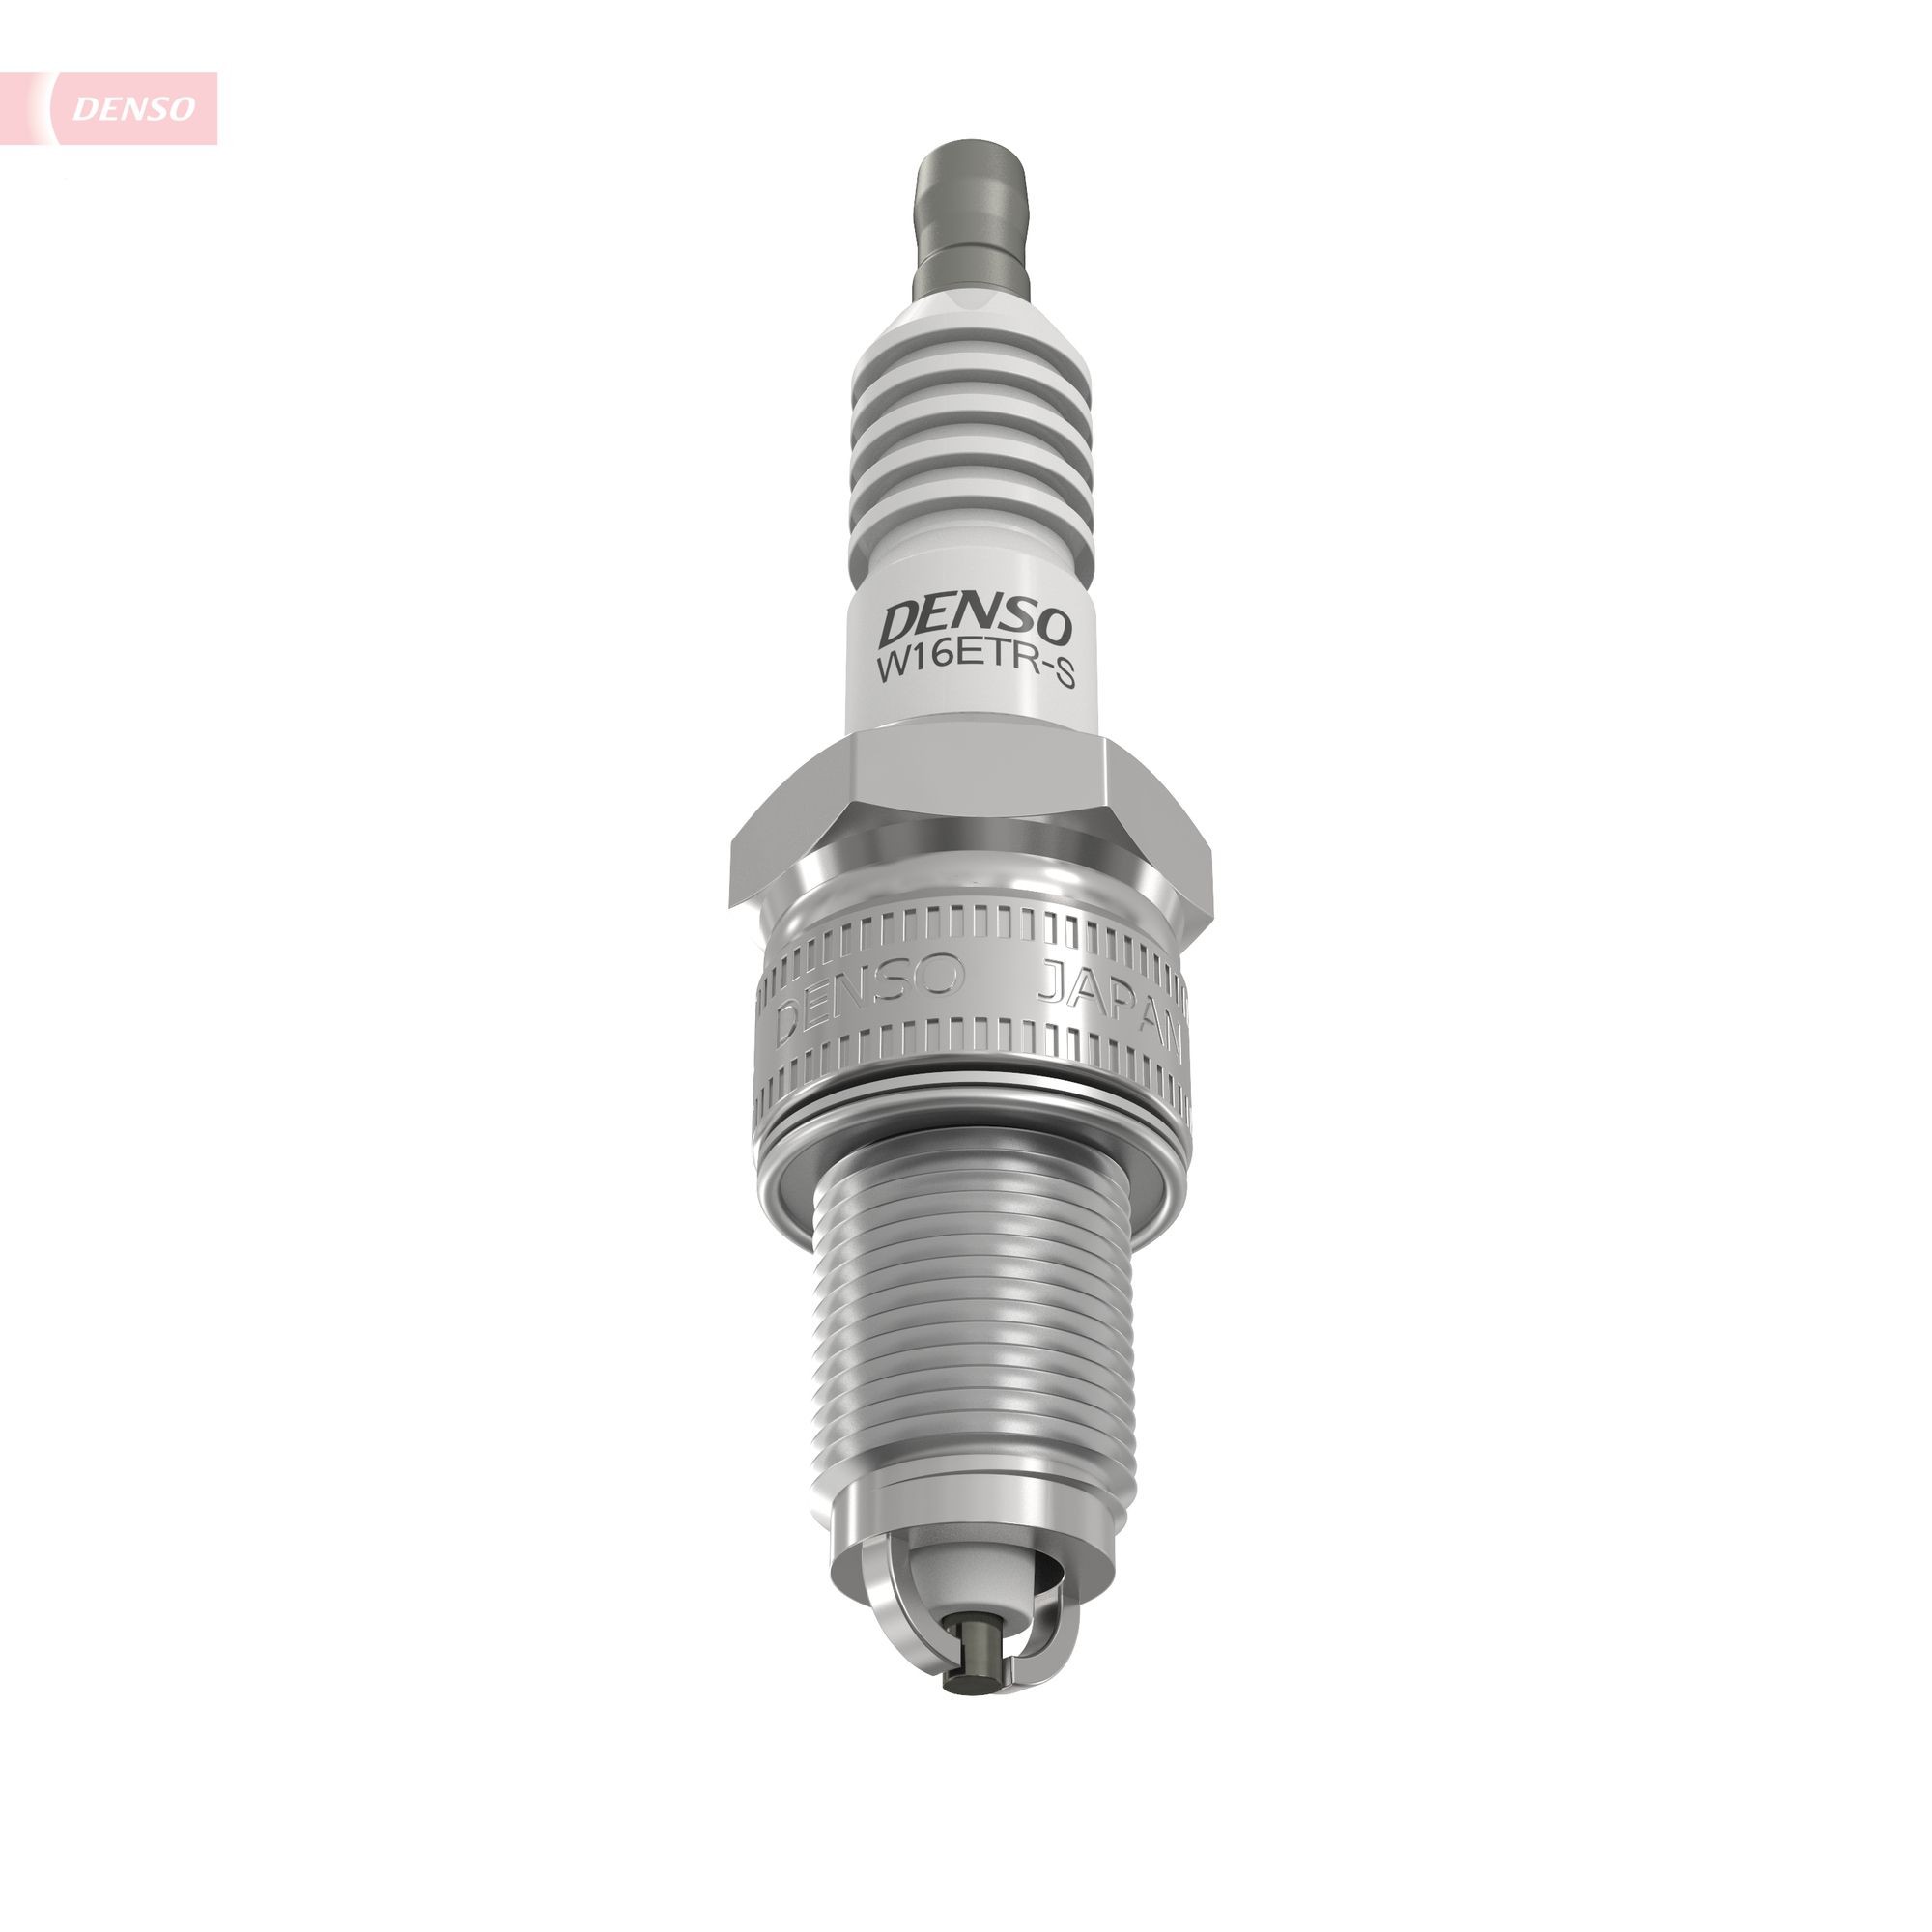 W16ETRS Spark plug DENSO W16ETR-S review and test